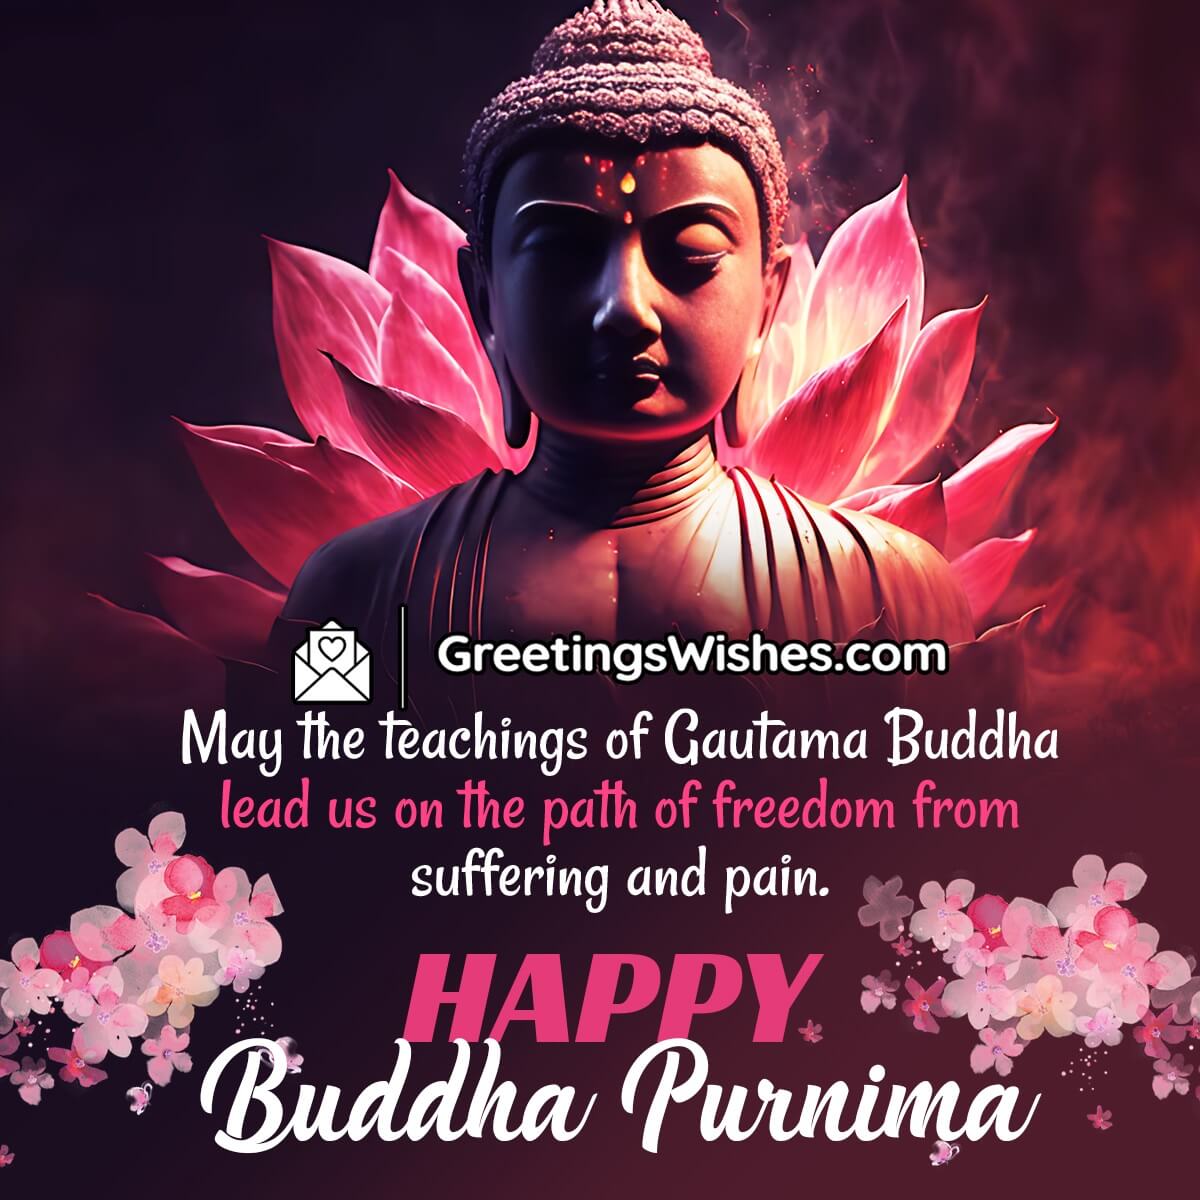 Buddha Purnima Wishes Messages ( 5th May)